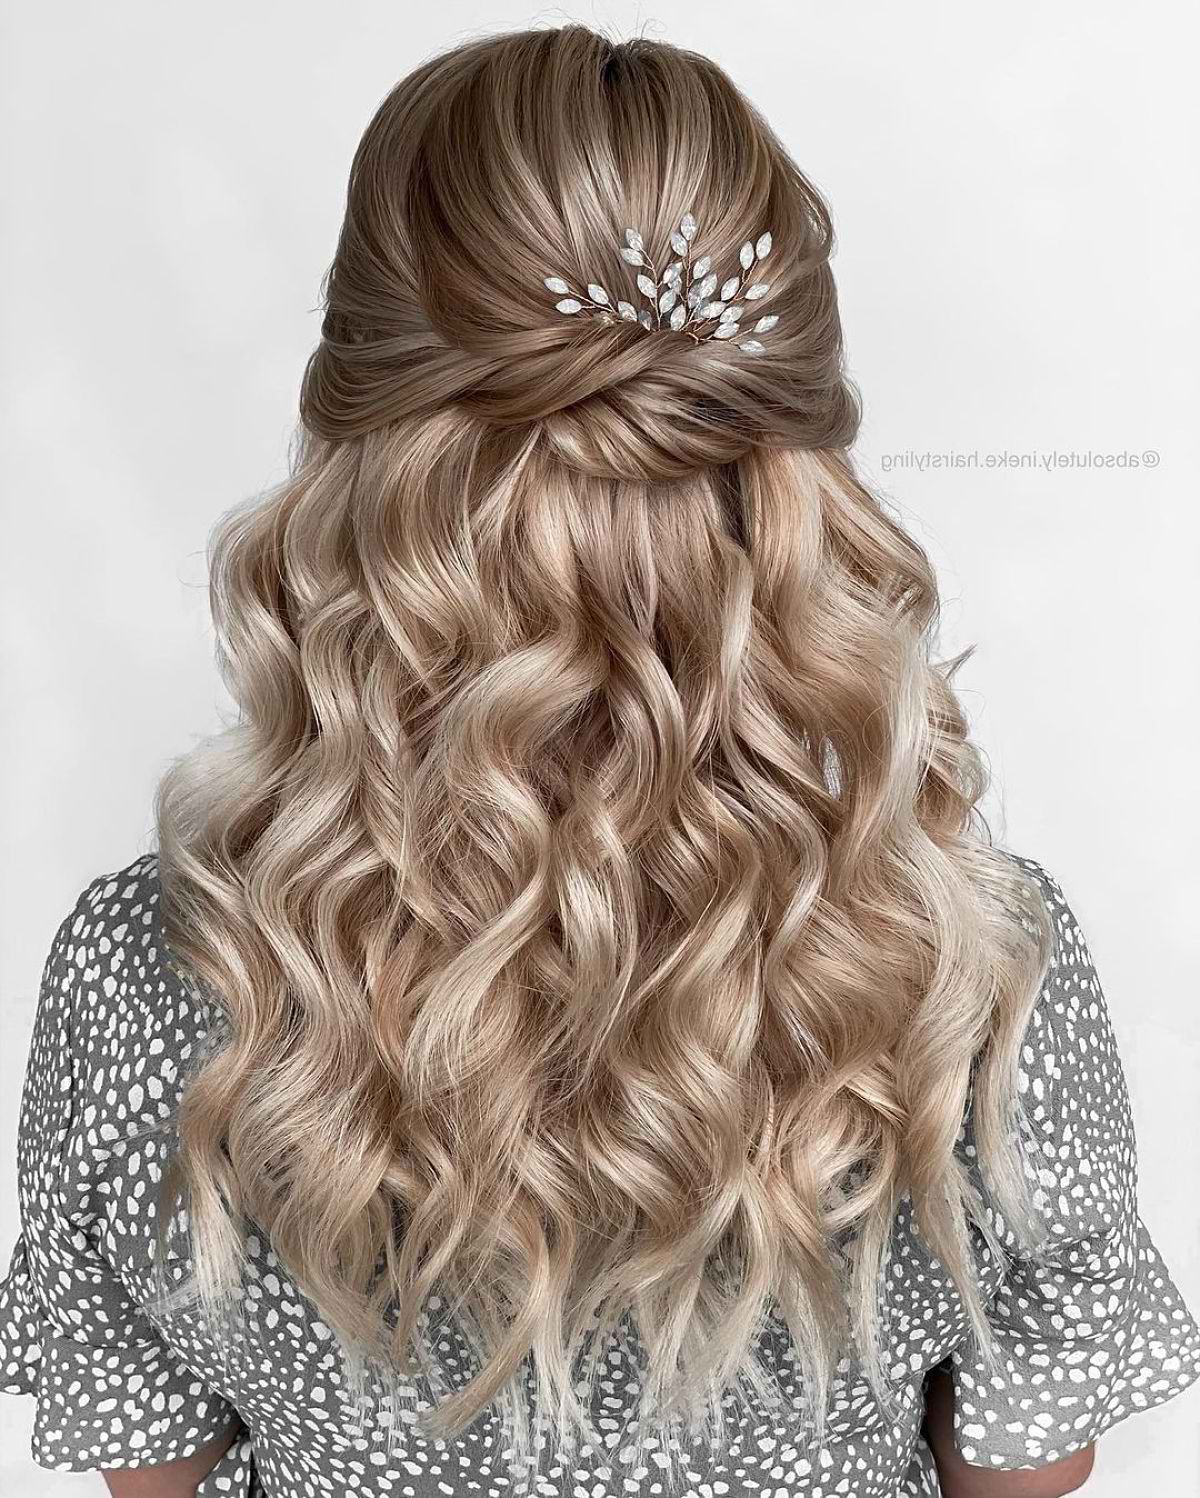 Top 24 Boho Hairstyles Trending In 2022 To Get That Bohemian Spirit Out Intended For Recent Boho Chic Chick Haircuts (View 8 of 20)